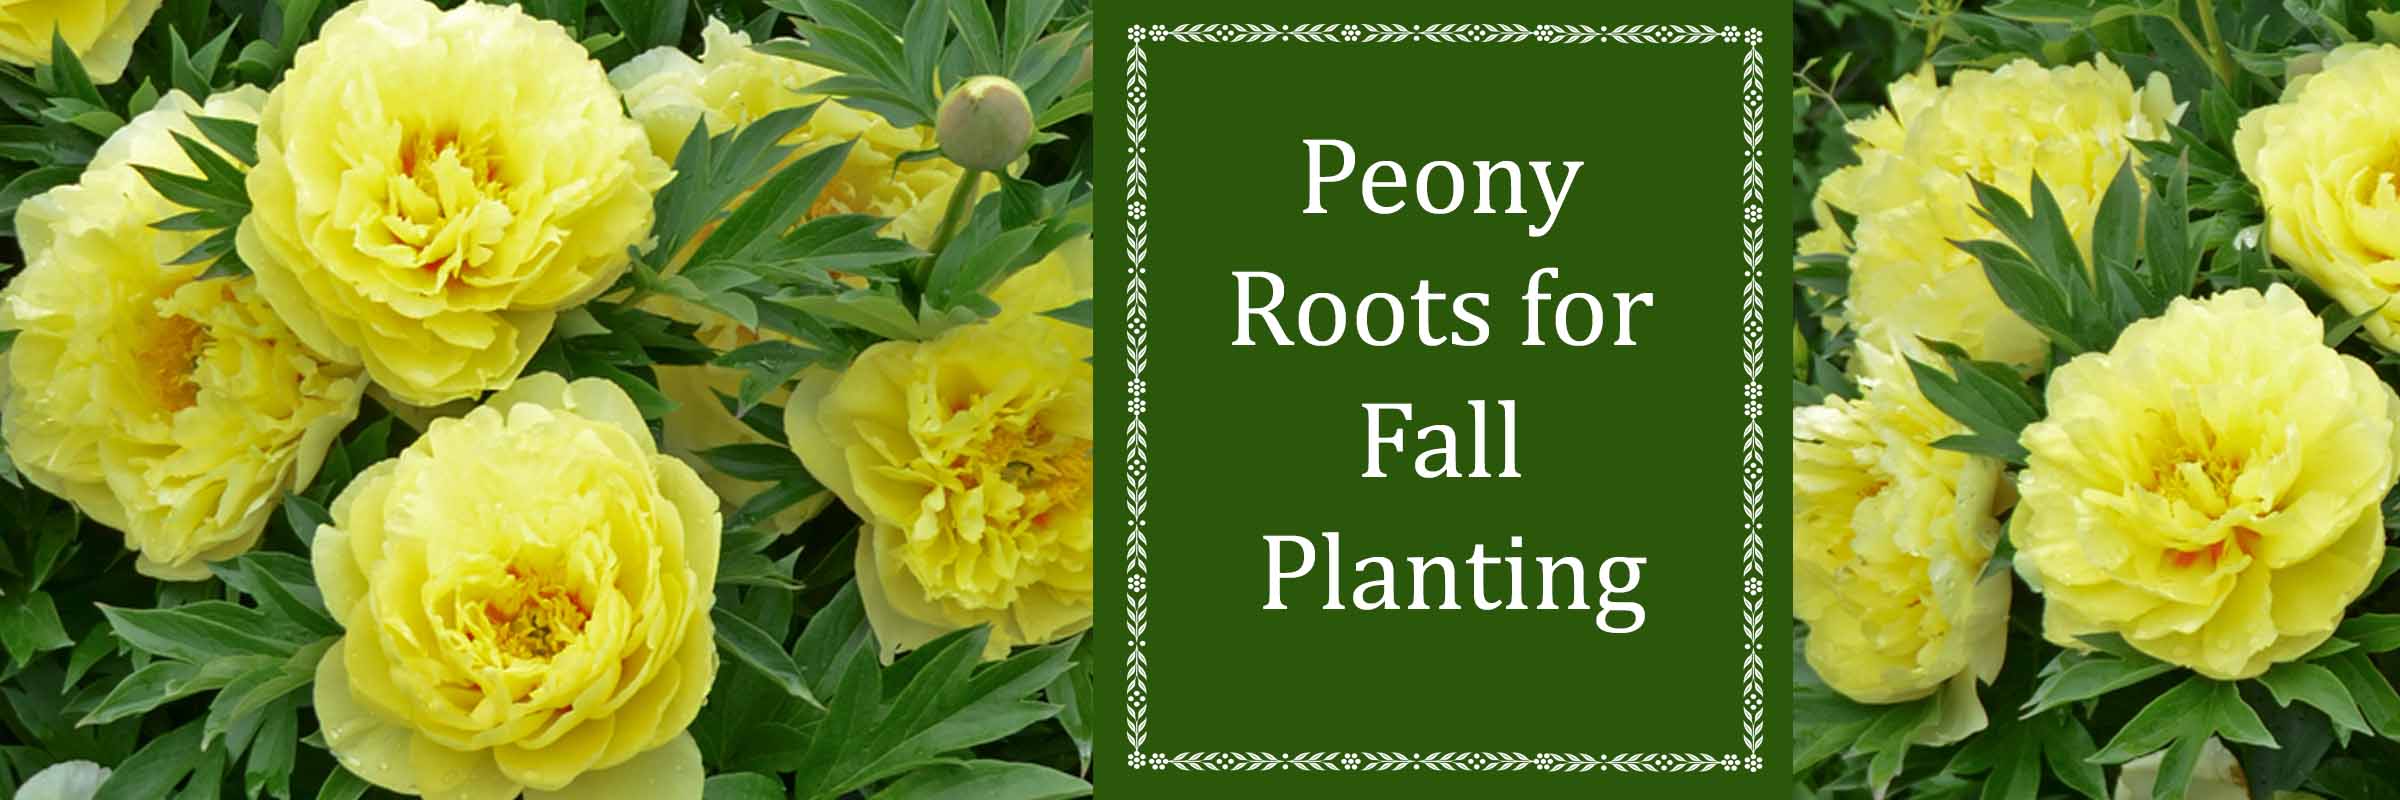 Peony roots for fall planting for sale